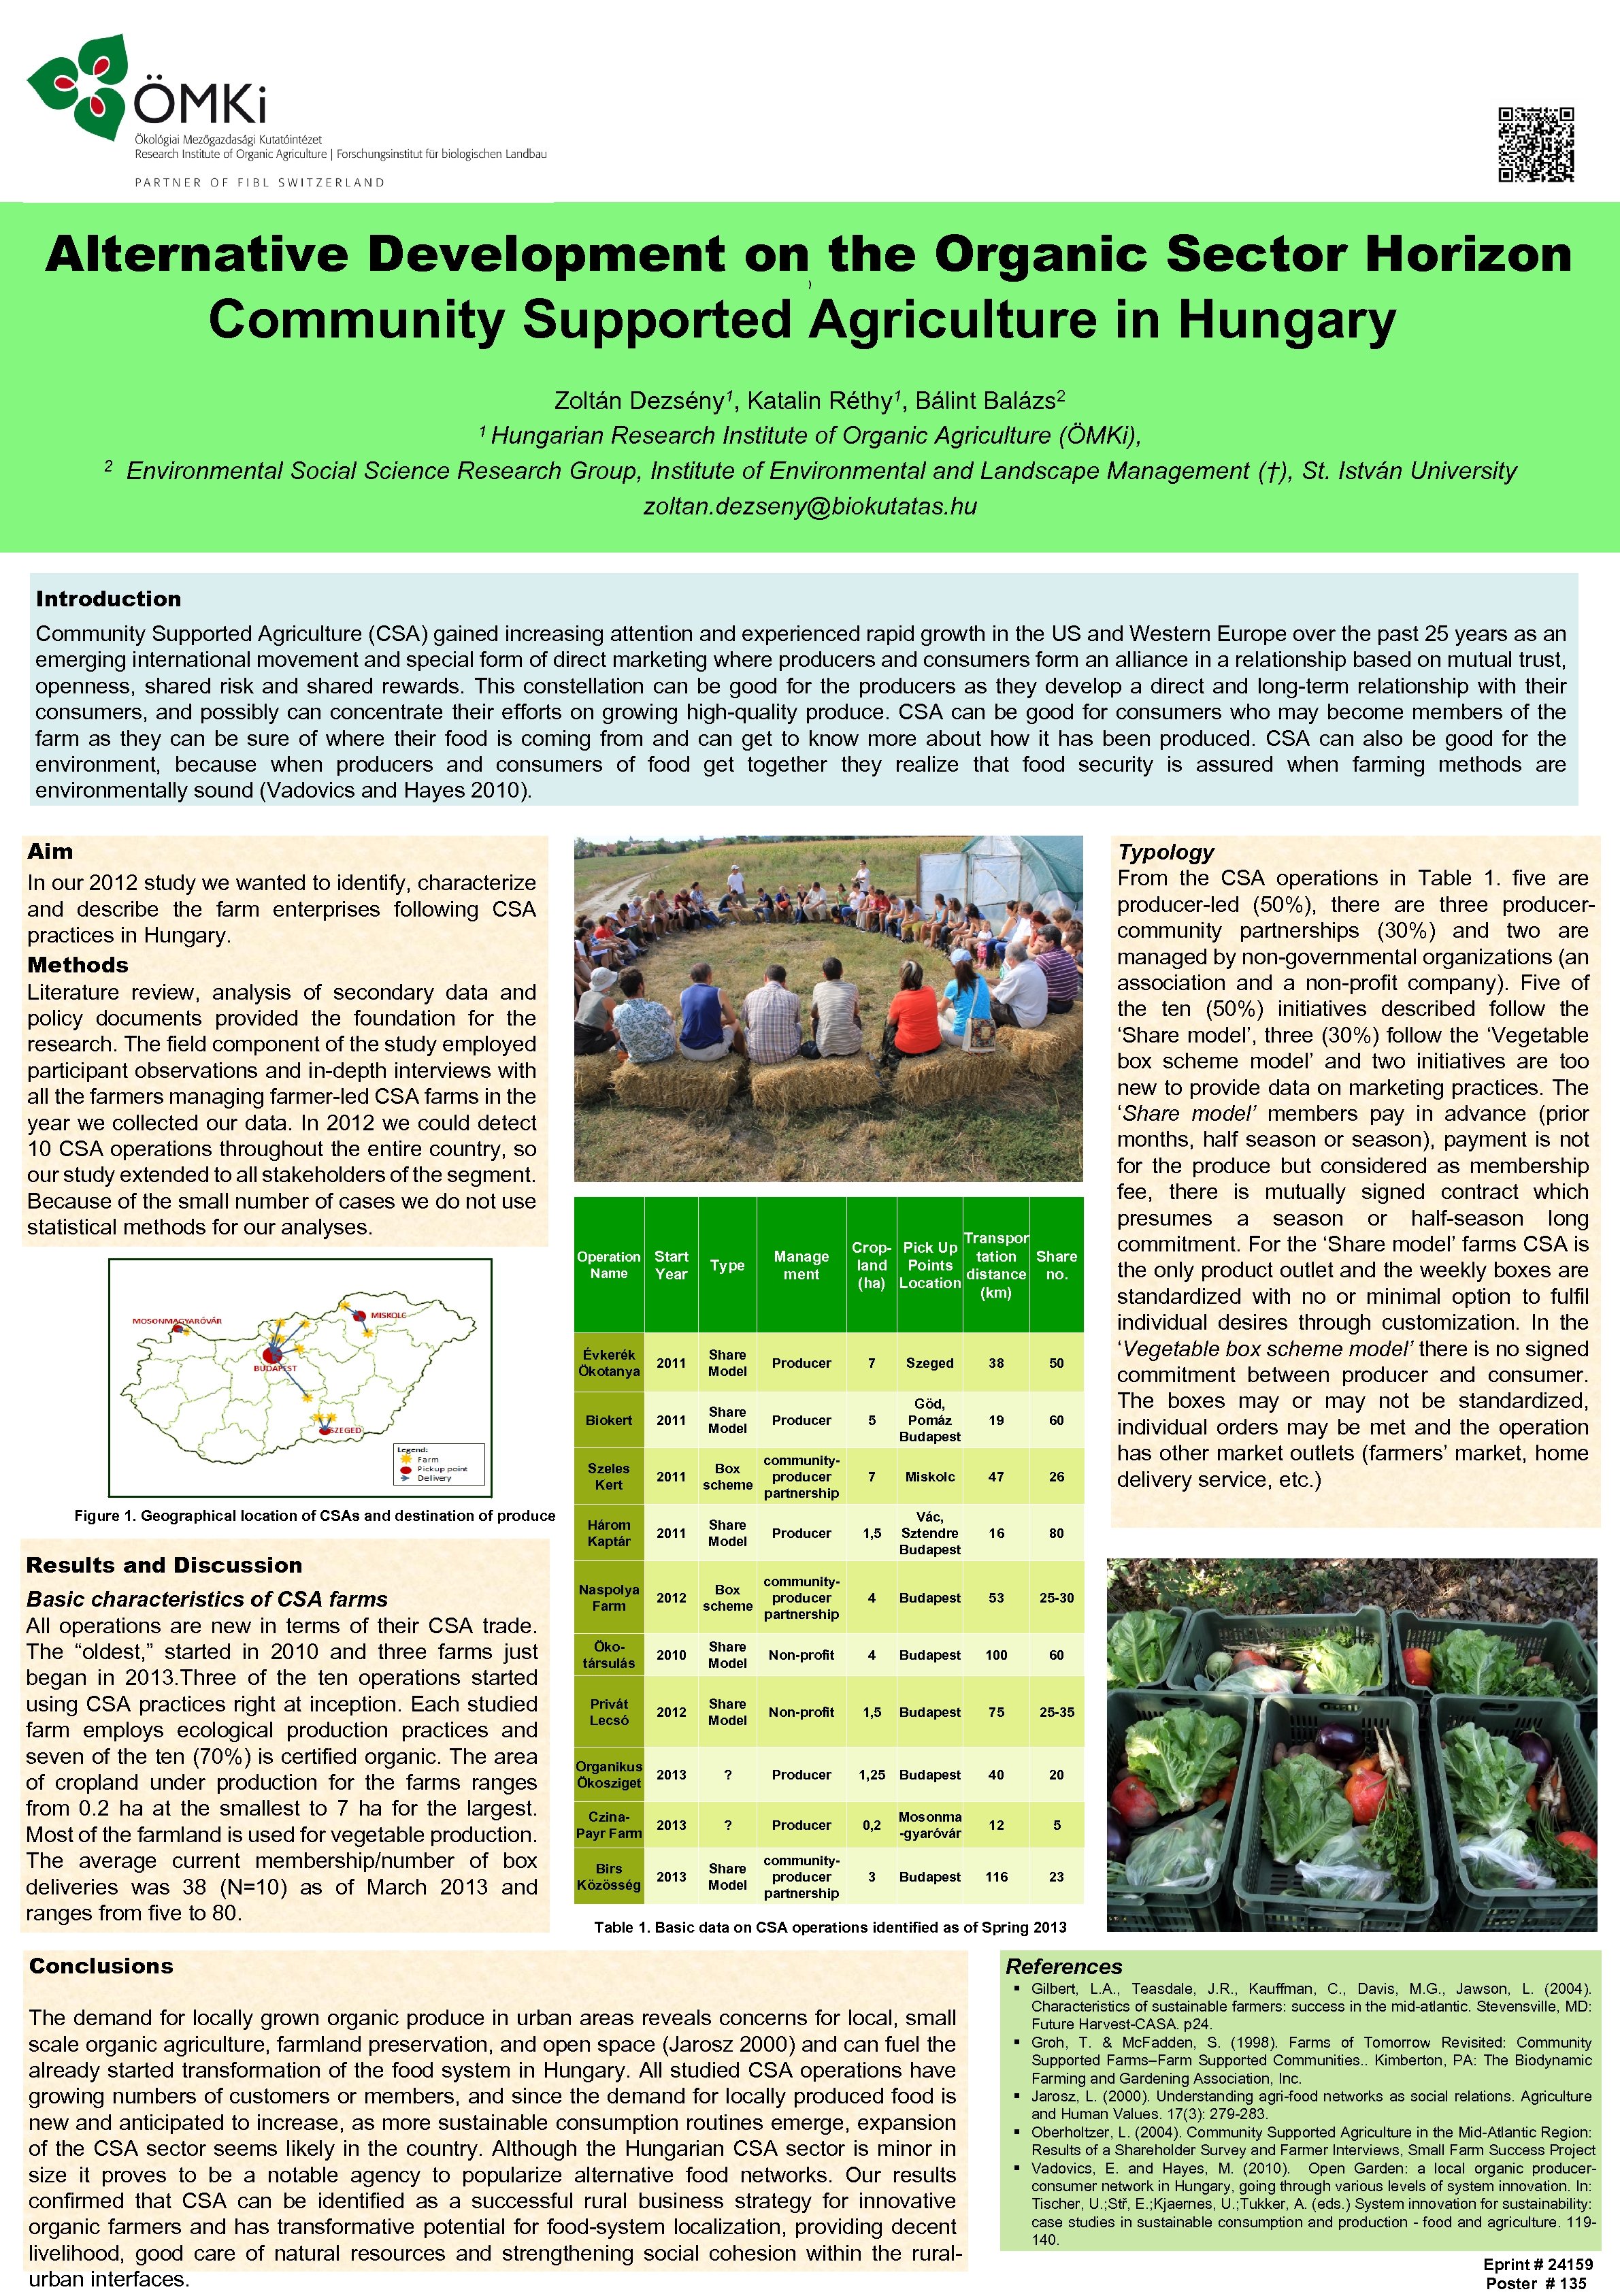 Alternative Development on the Organic Sector Horizon Community Supported Agriculture in Hungary ) 2